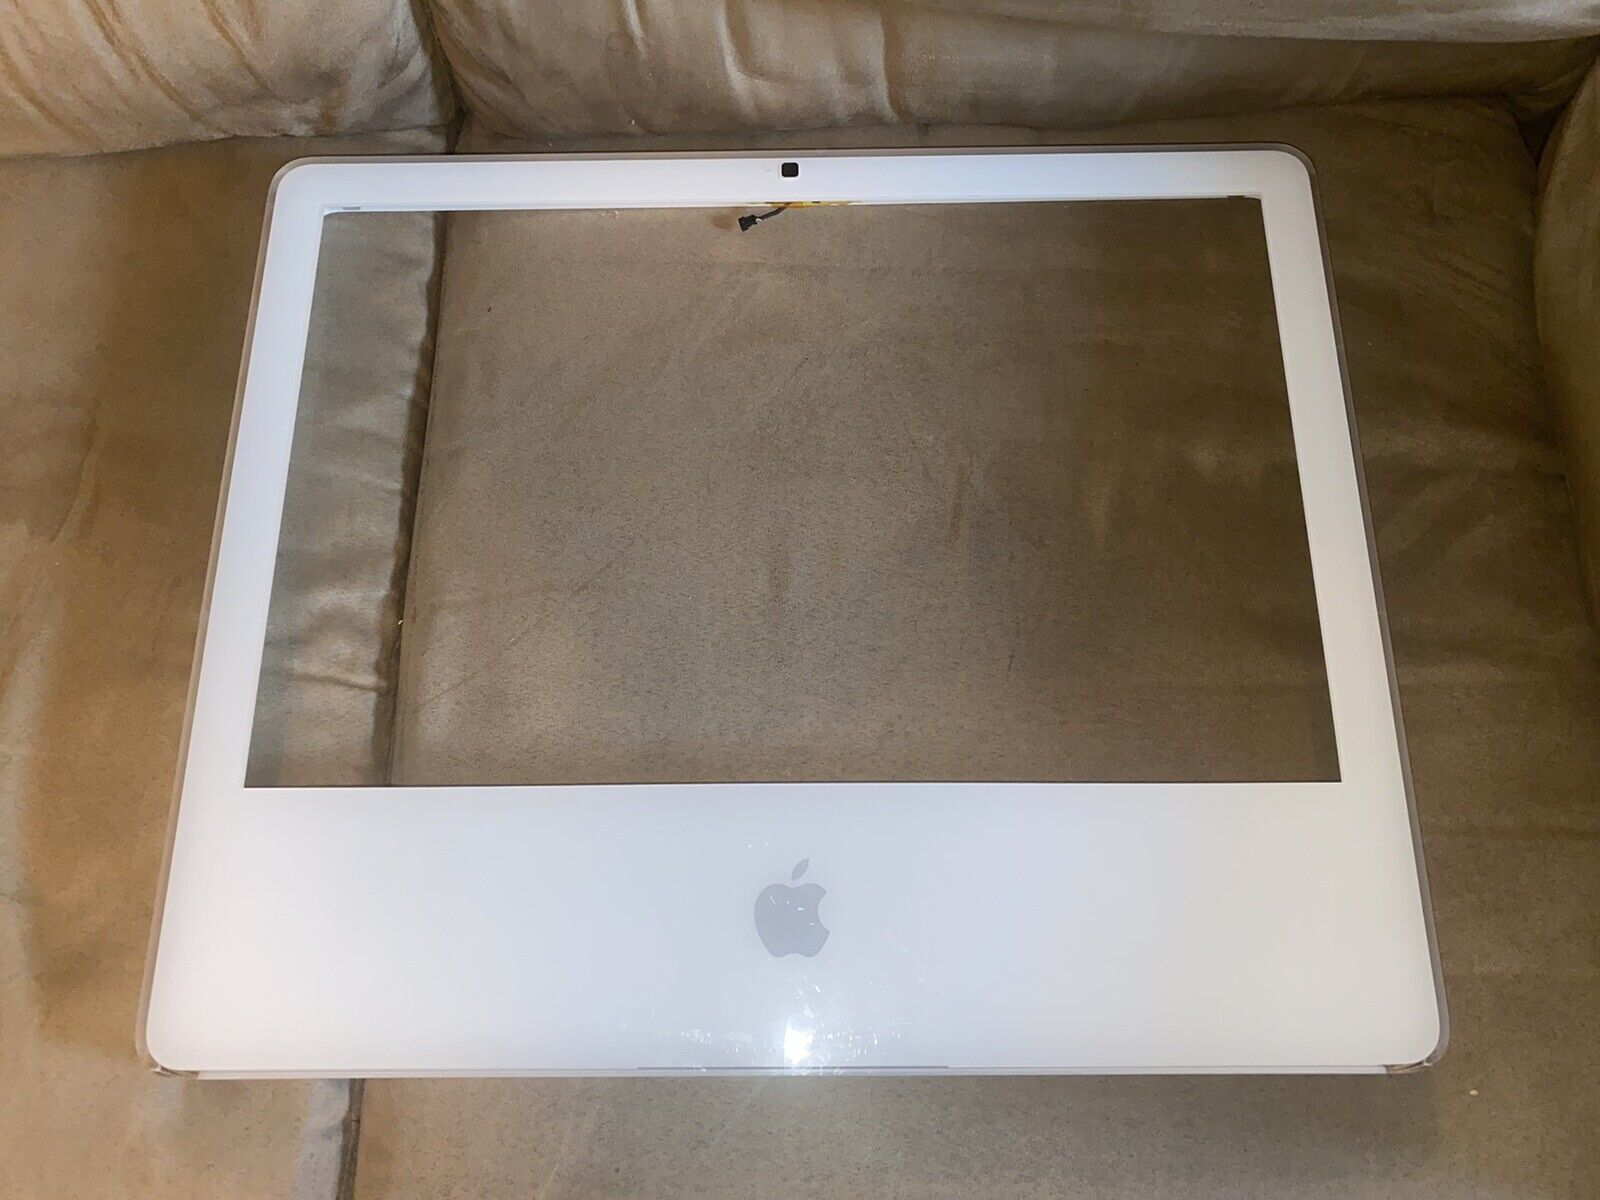 Apple iMac 5,1 A1207 EMC 2118 Core 2 Duo Late 2006 Front Bezel and Camera